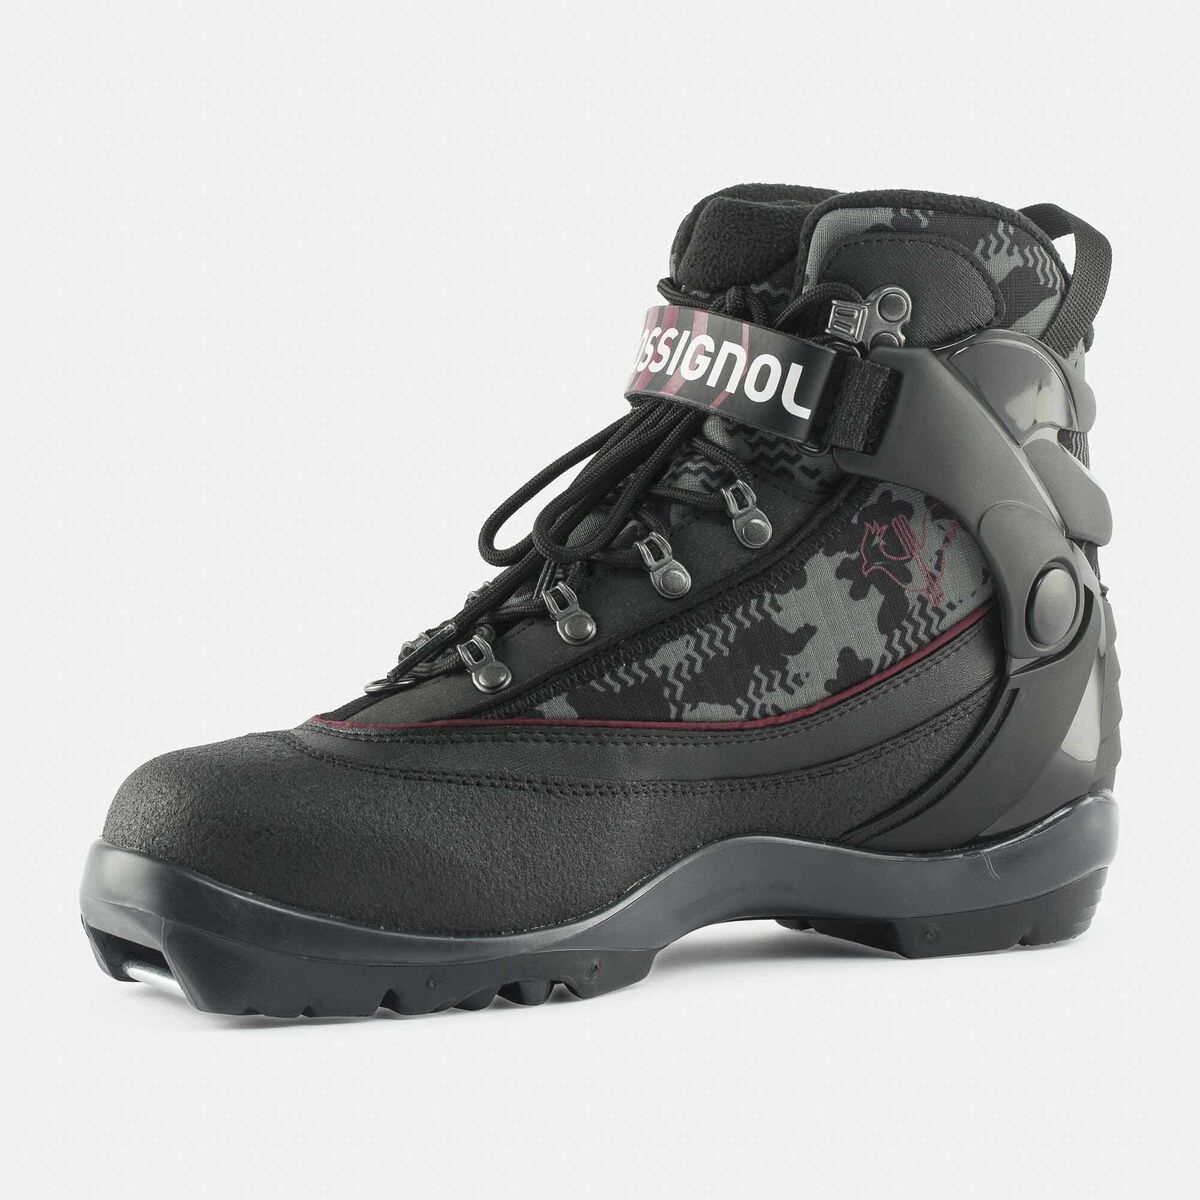 Unisex Backcountry Nordic Boots Bc X5